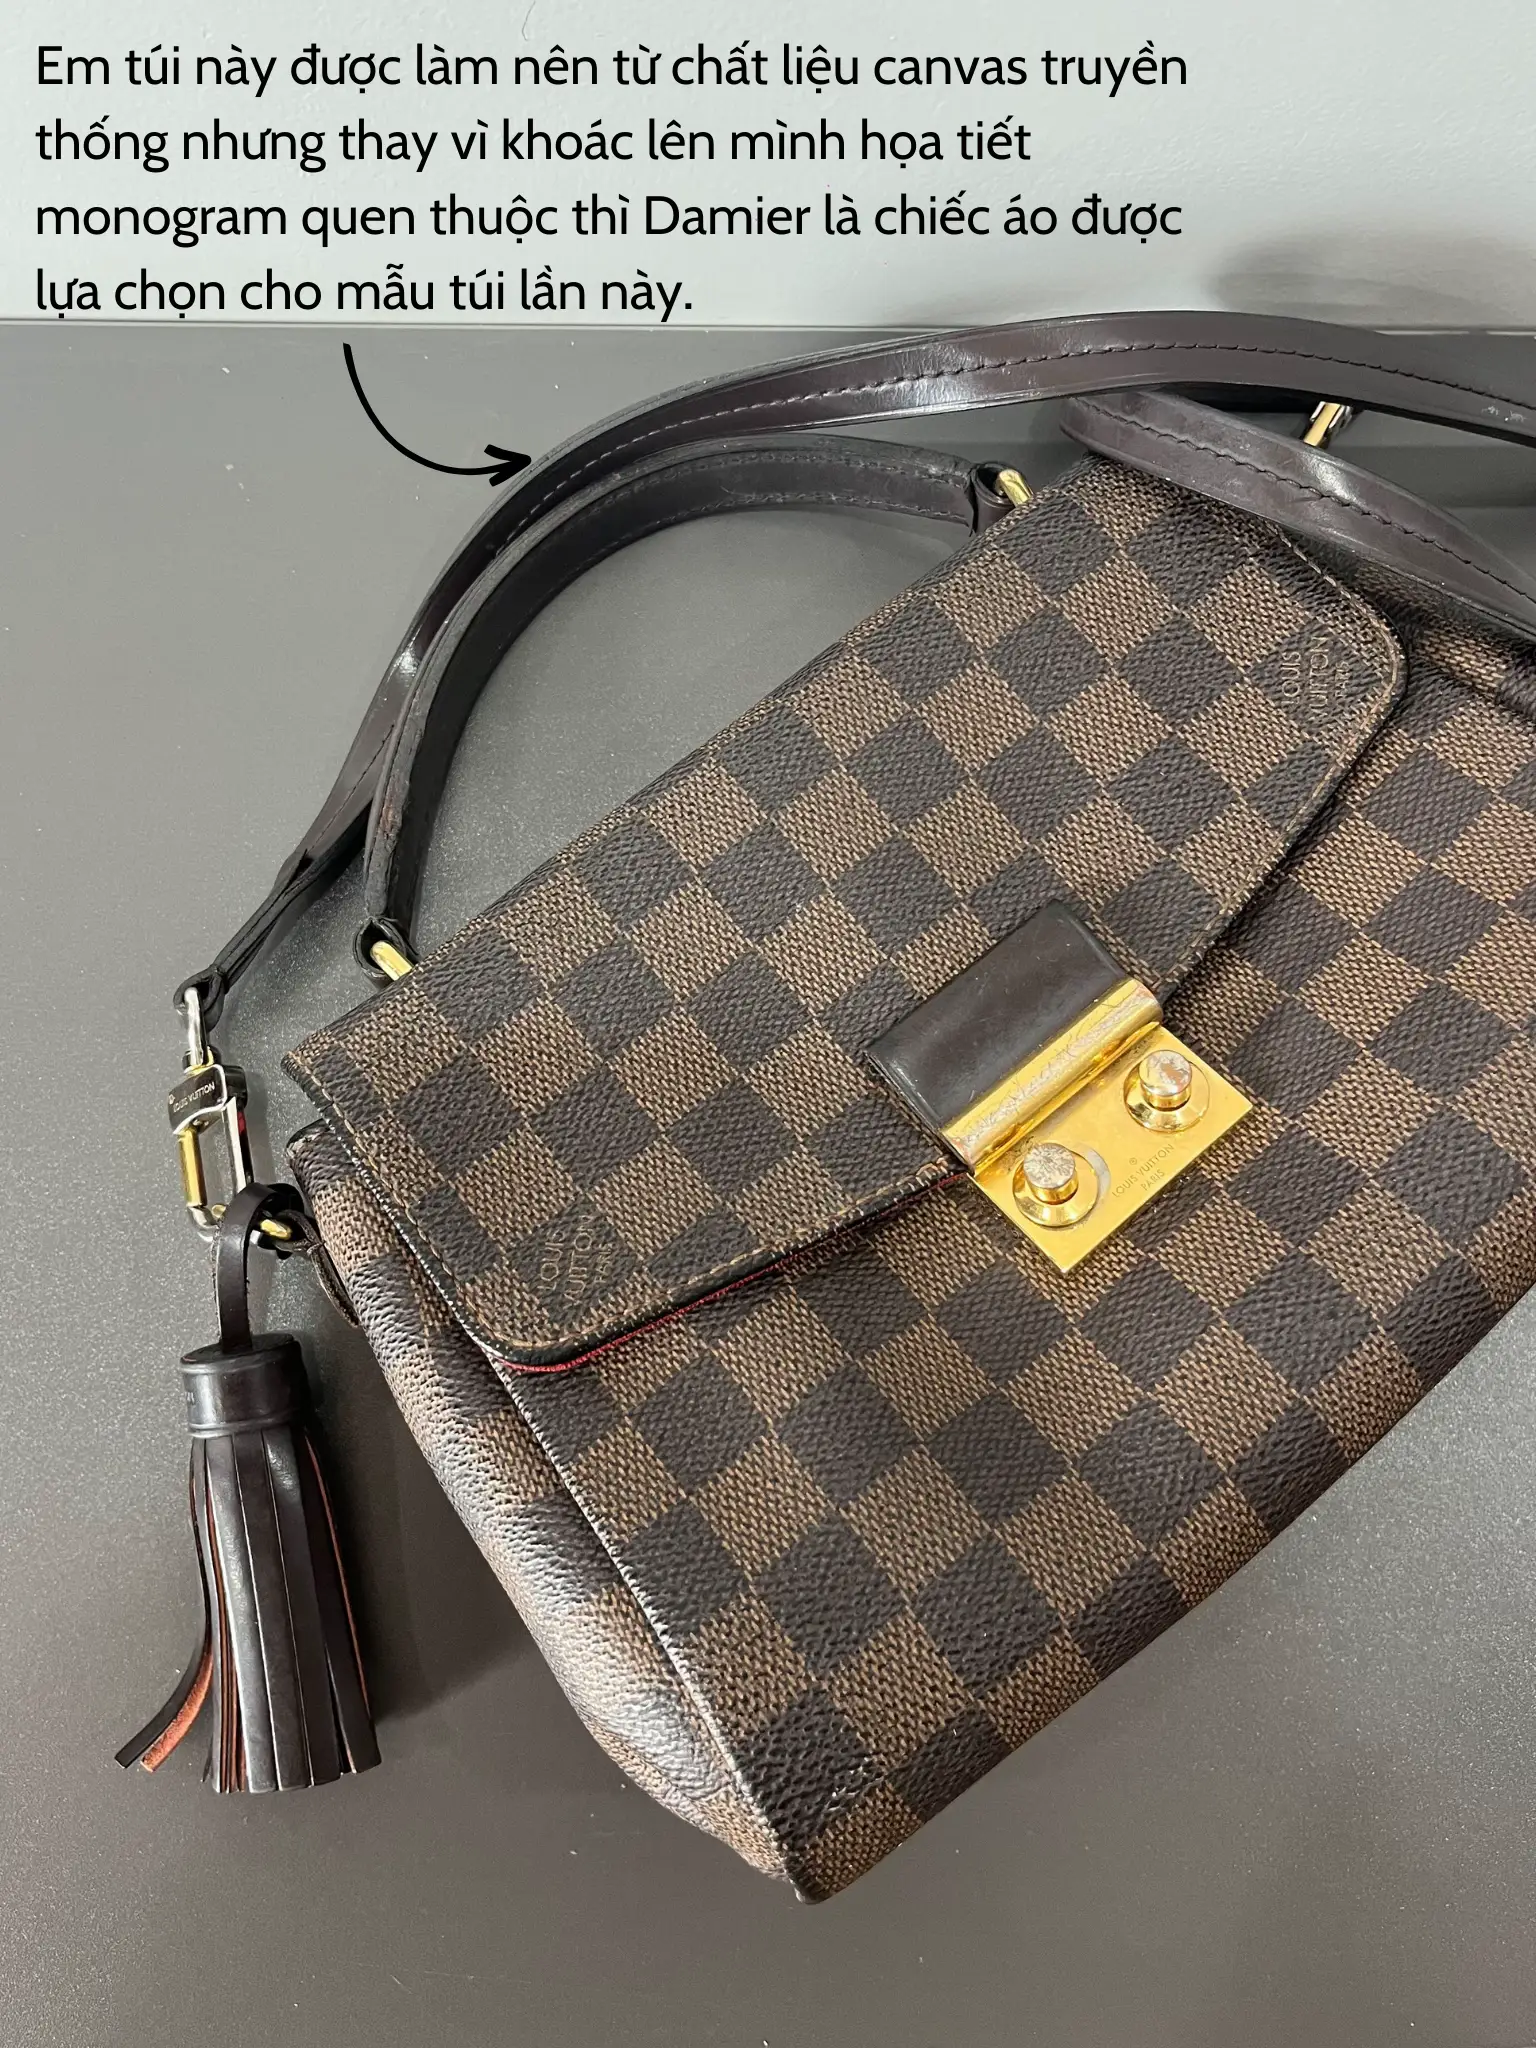 Louis Vuitton Review: Croisette Bag, Gallery posted by Jamila